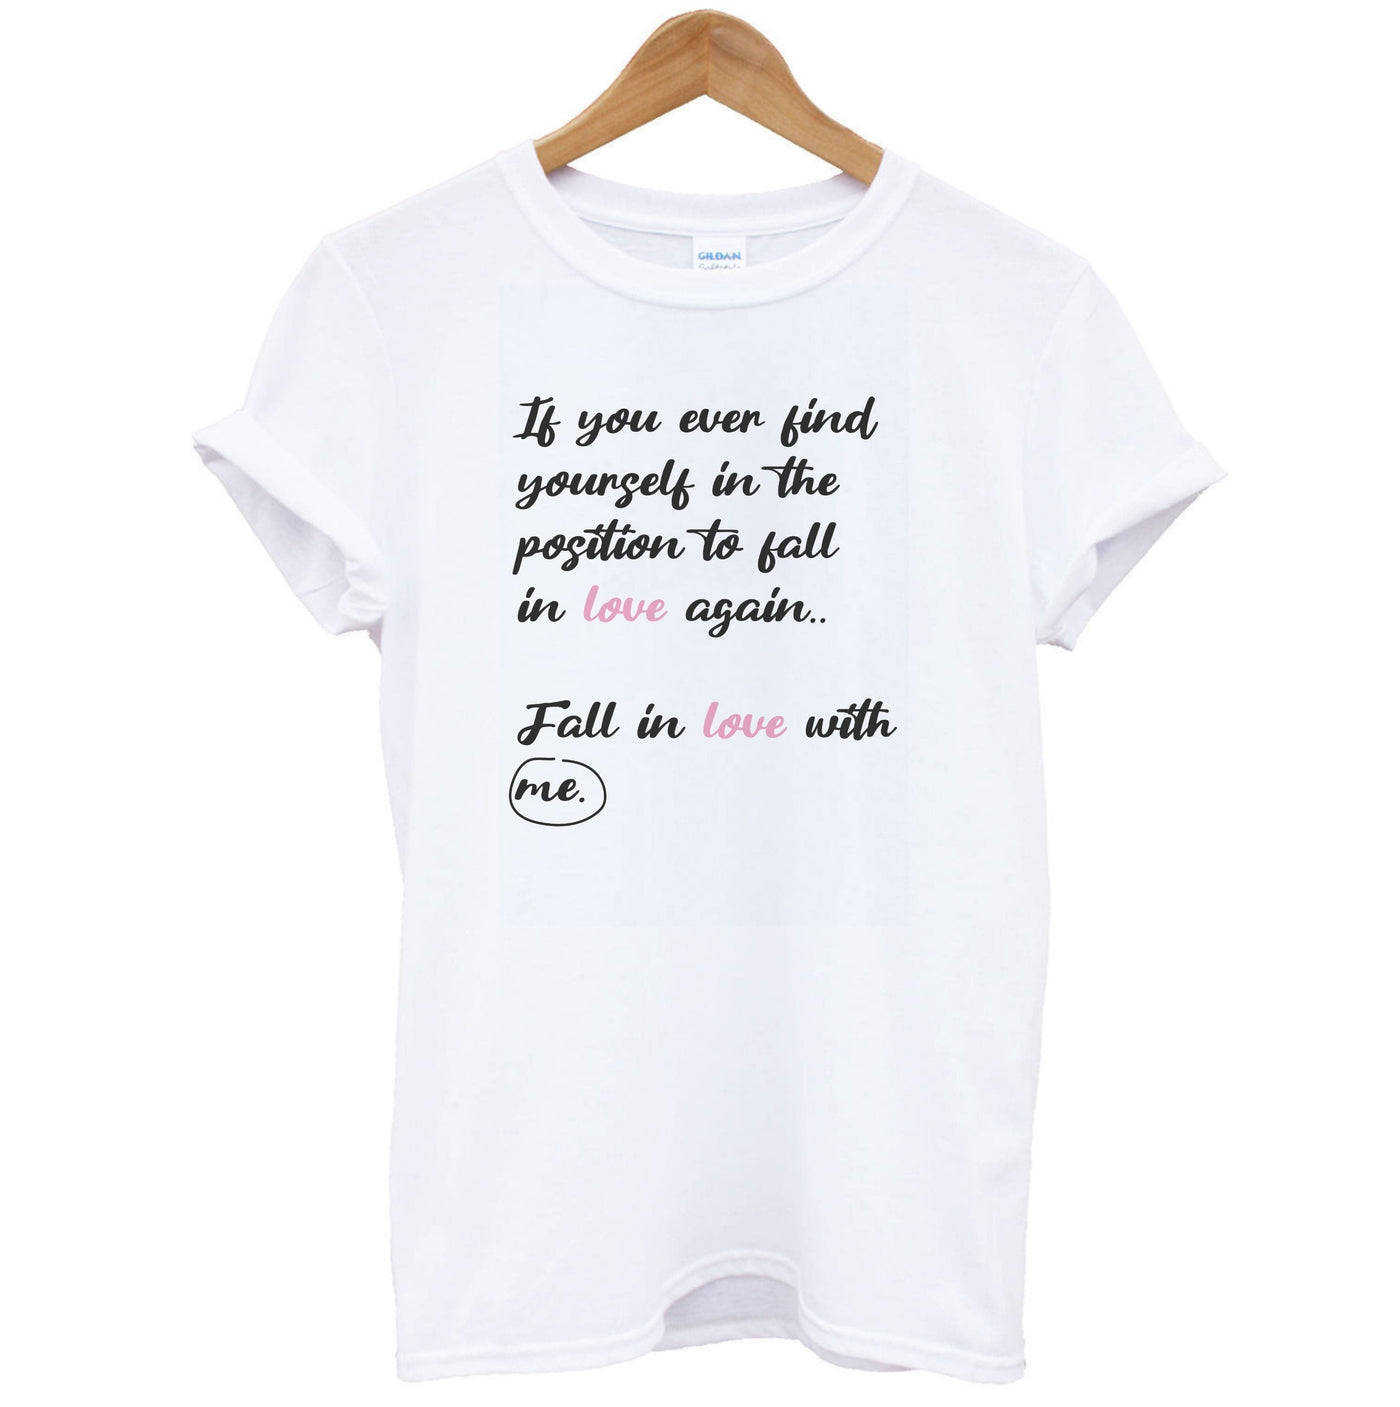 Fall In Love With Me - It Ends With Us T-Shirt